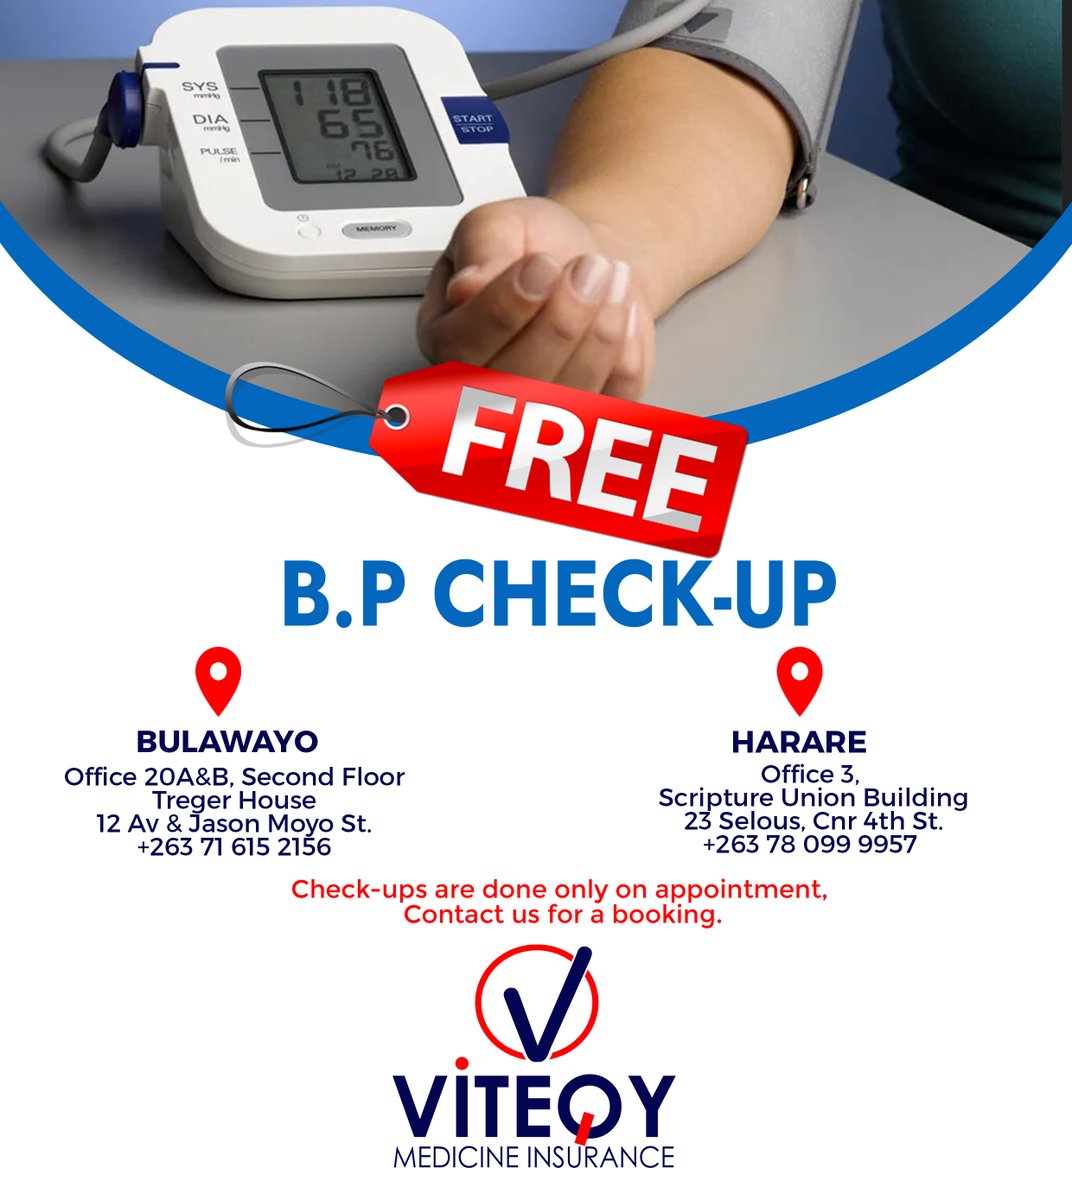 HAVE YOUR BP CHECKED FOR FREE. CONTACT US FOR AN APPOINTMENT

#freebpcheck #free #bpcheck #bloodpressurecheck  #doctors #consultation 
GET IN TOUCH FOR MORE INFORMATION & AVAILABLE PACKAGES
+263 780 999 953 | +263716152156 | +61468549226 
admin@viteqy.com. viteqy.com